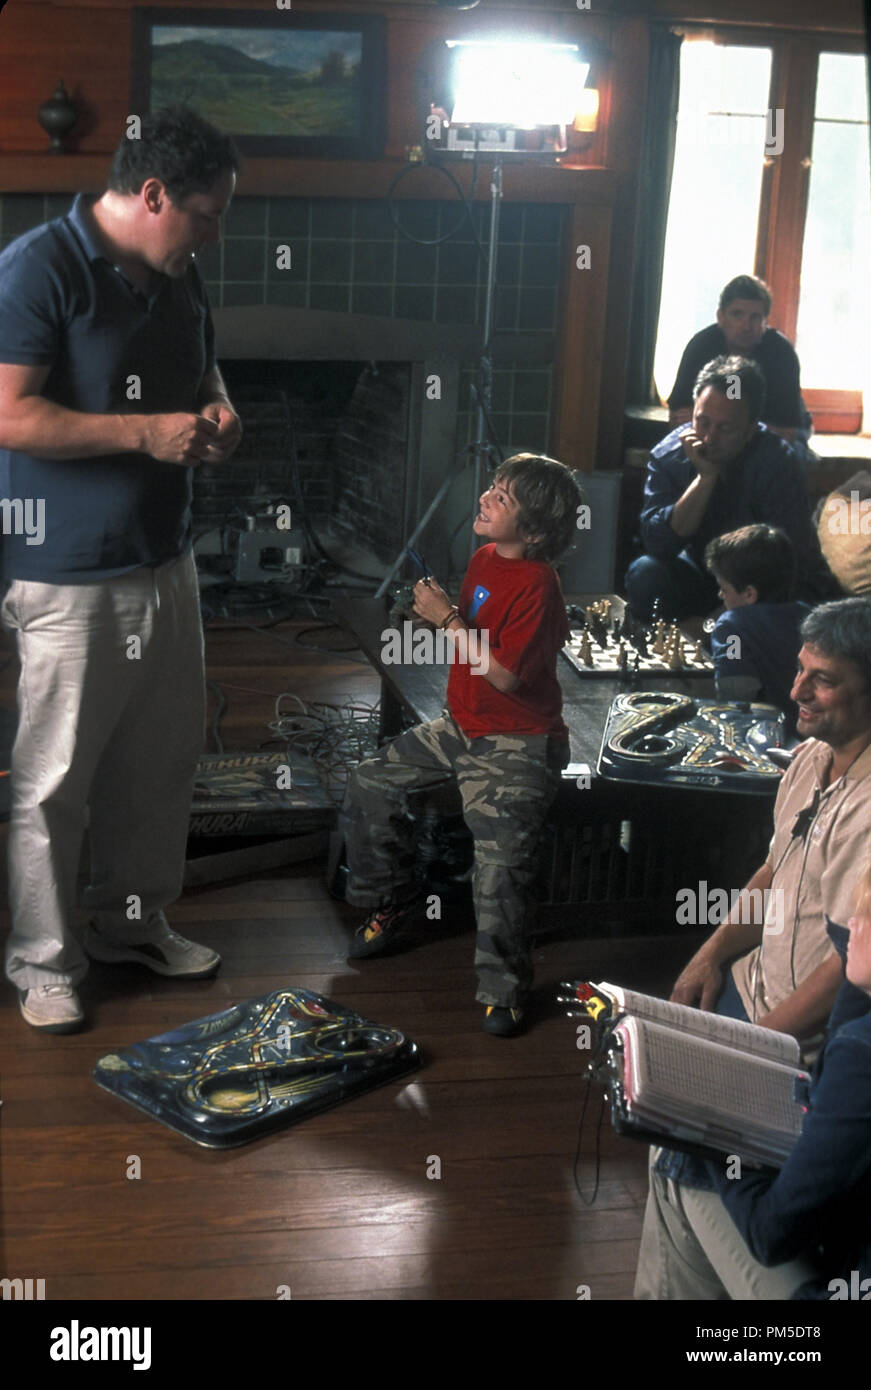 Film Still / Publicity Still from 'Zathura' Director Jon Favreau, Jonah Bobo © 2005 Columbia Pictures Photo Credit: Merrick Morton  File Reference # 30736559THA  For Editorial Use Only -  All Rights Reserved Stock Photo